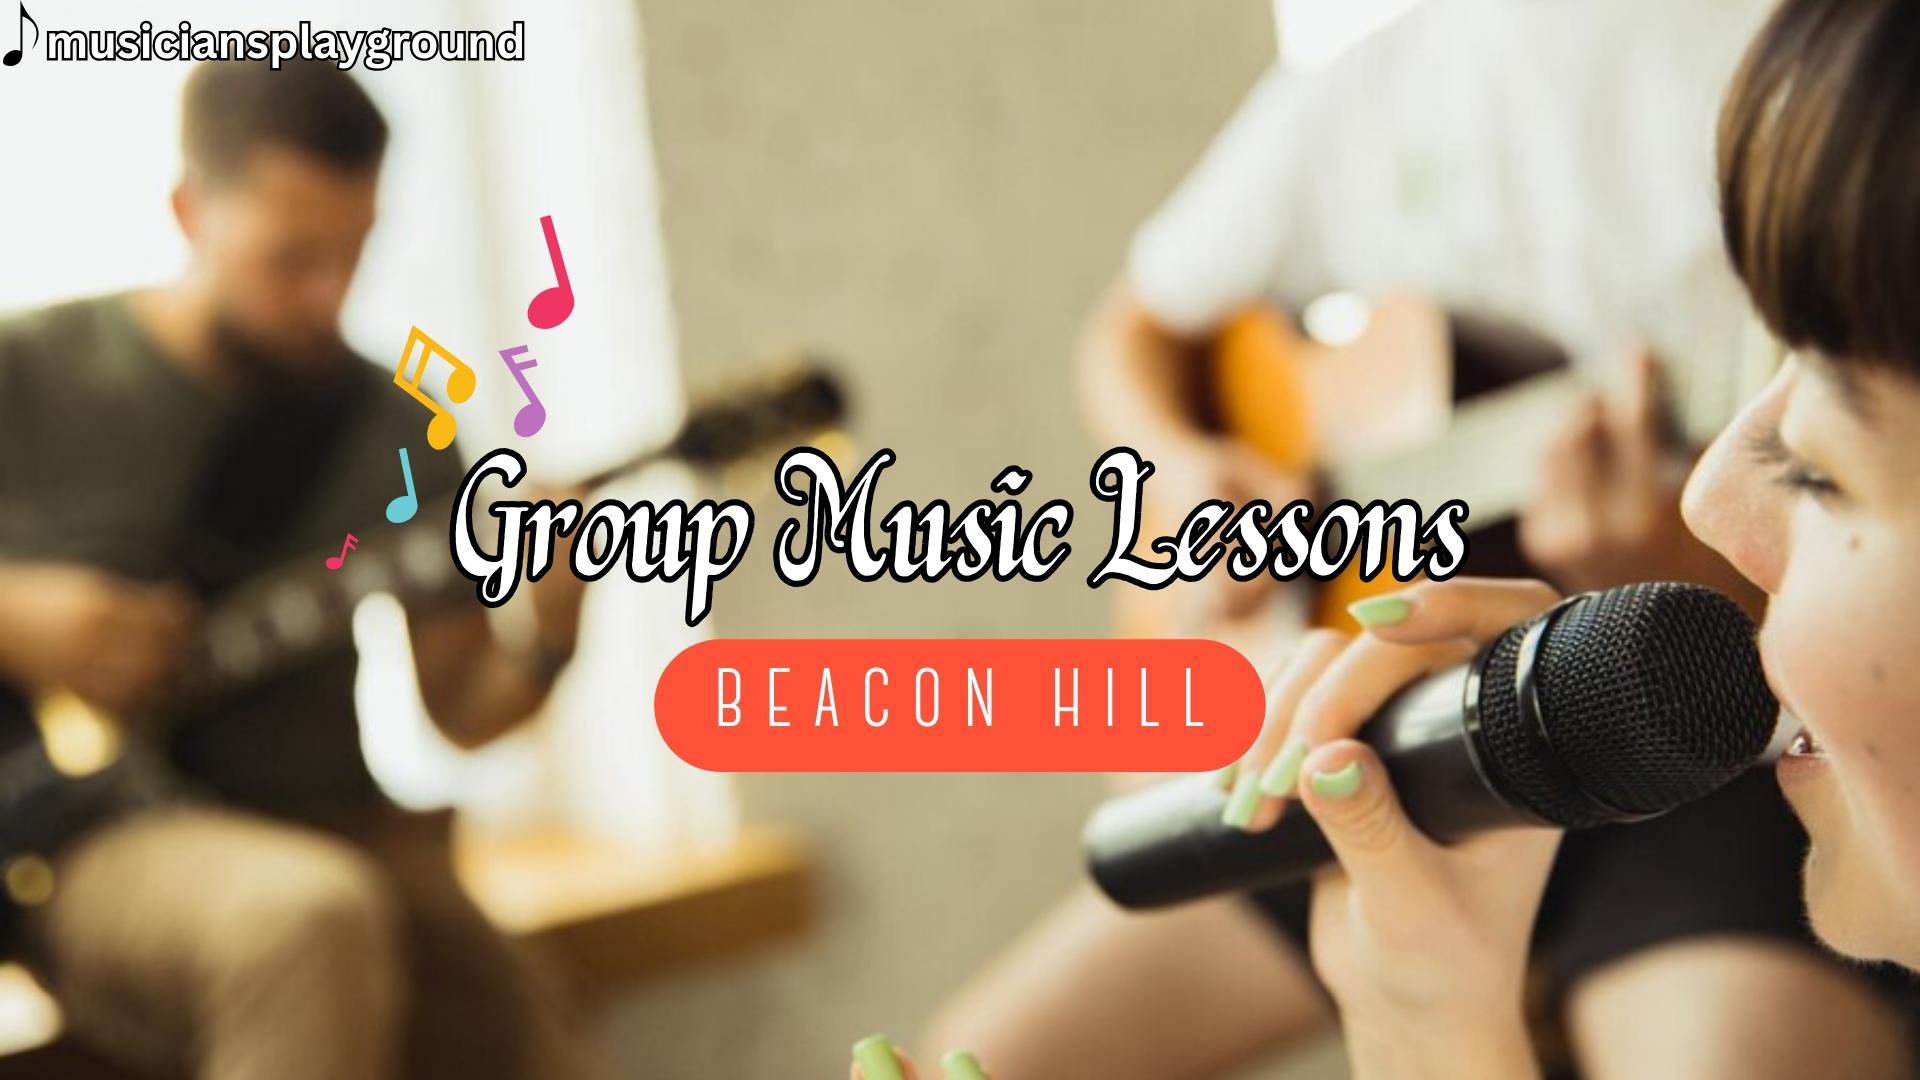 Group Music Lessons in Beacon Hill, Massachusetts: Enhance Your Musical Skills at Musicians Playground